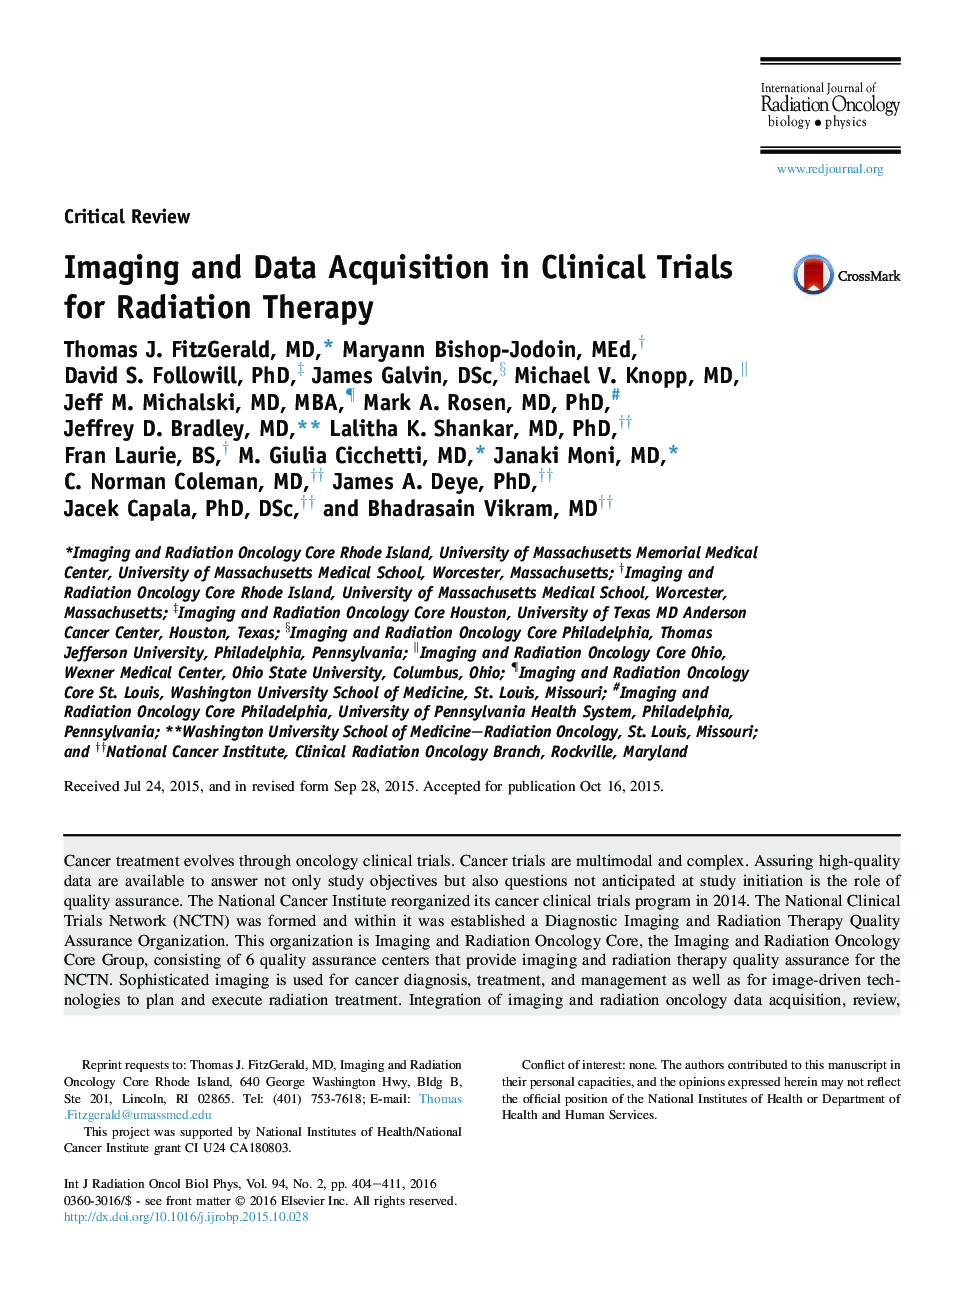 Imaging and Data Acquisition in Clinical Trials for Radiation Therapy